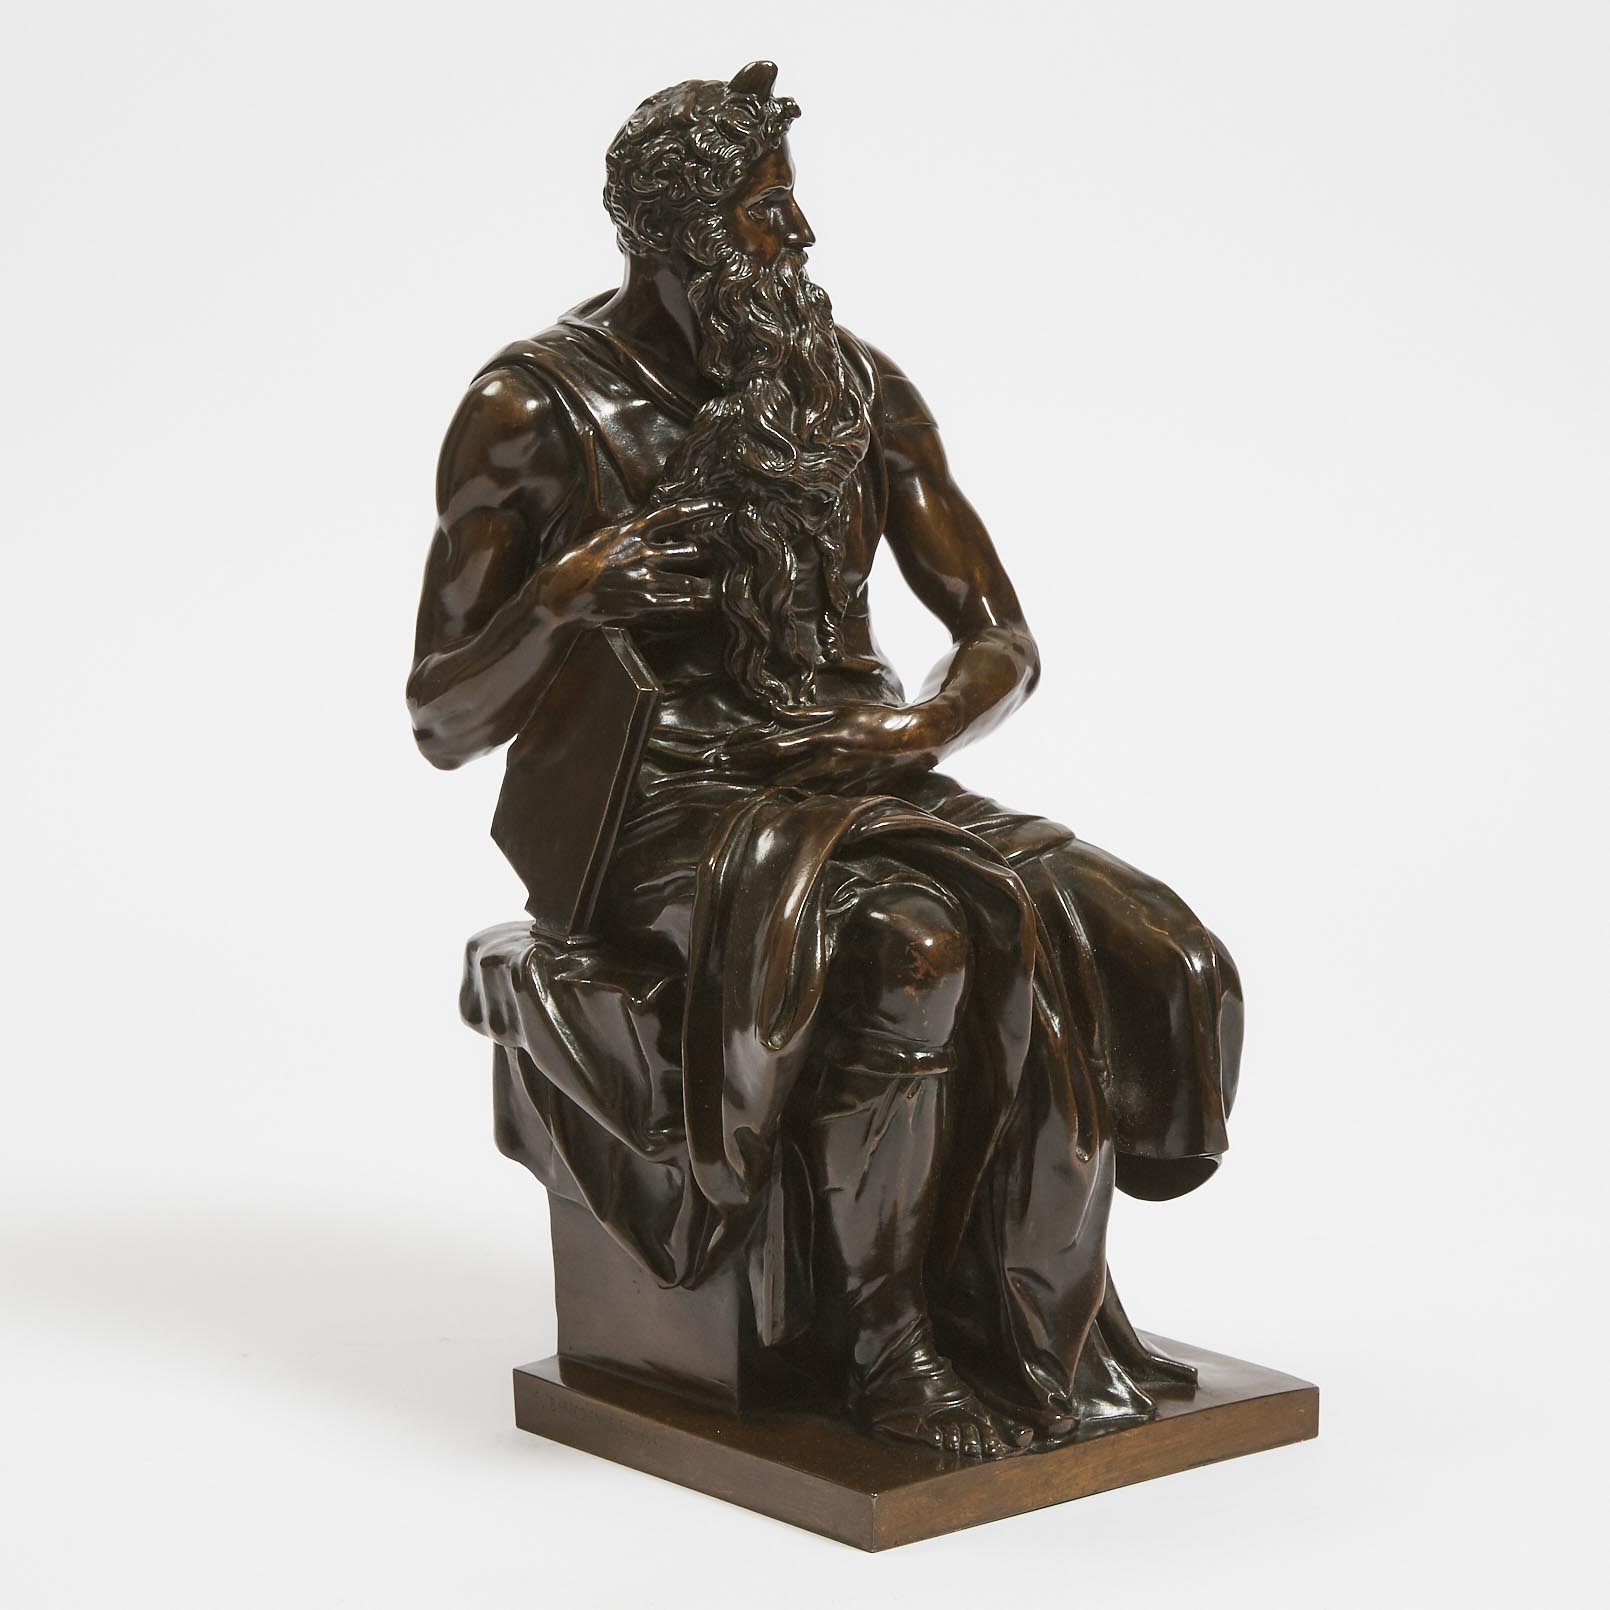 Ferdinand Barbedienne Patinated Bronze Model of Moses, after Michelangelo, 19th century